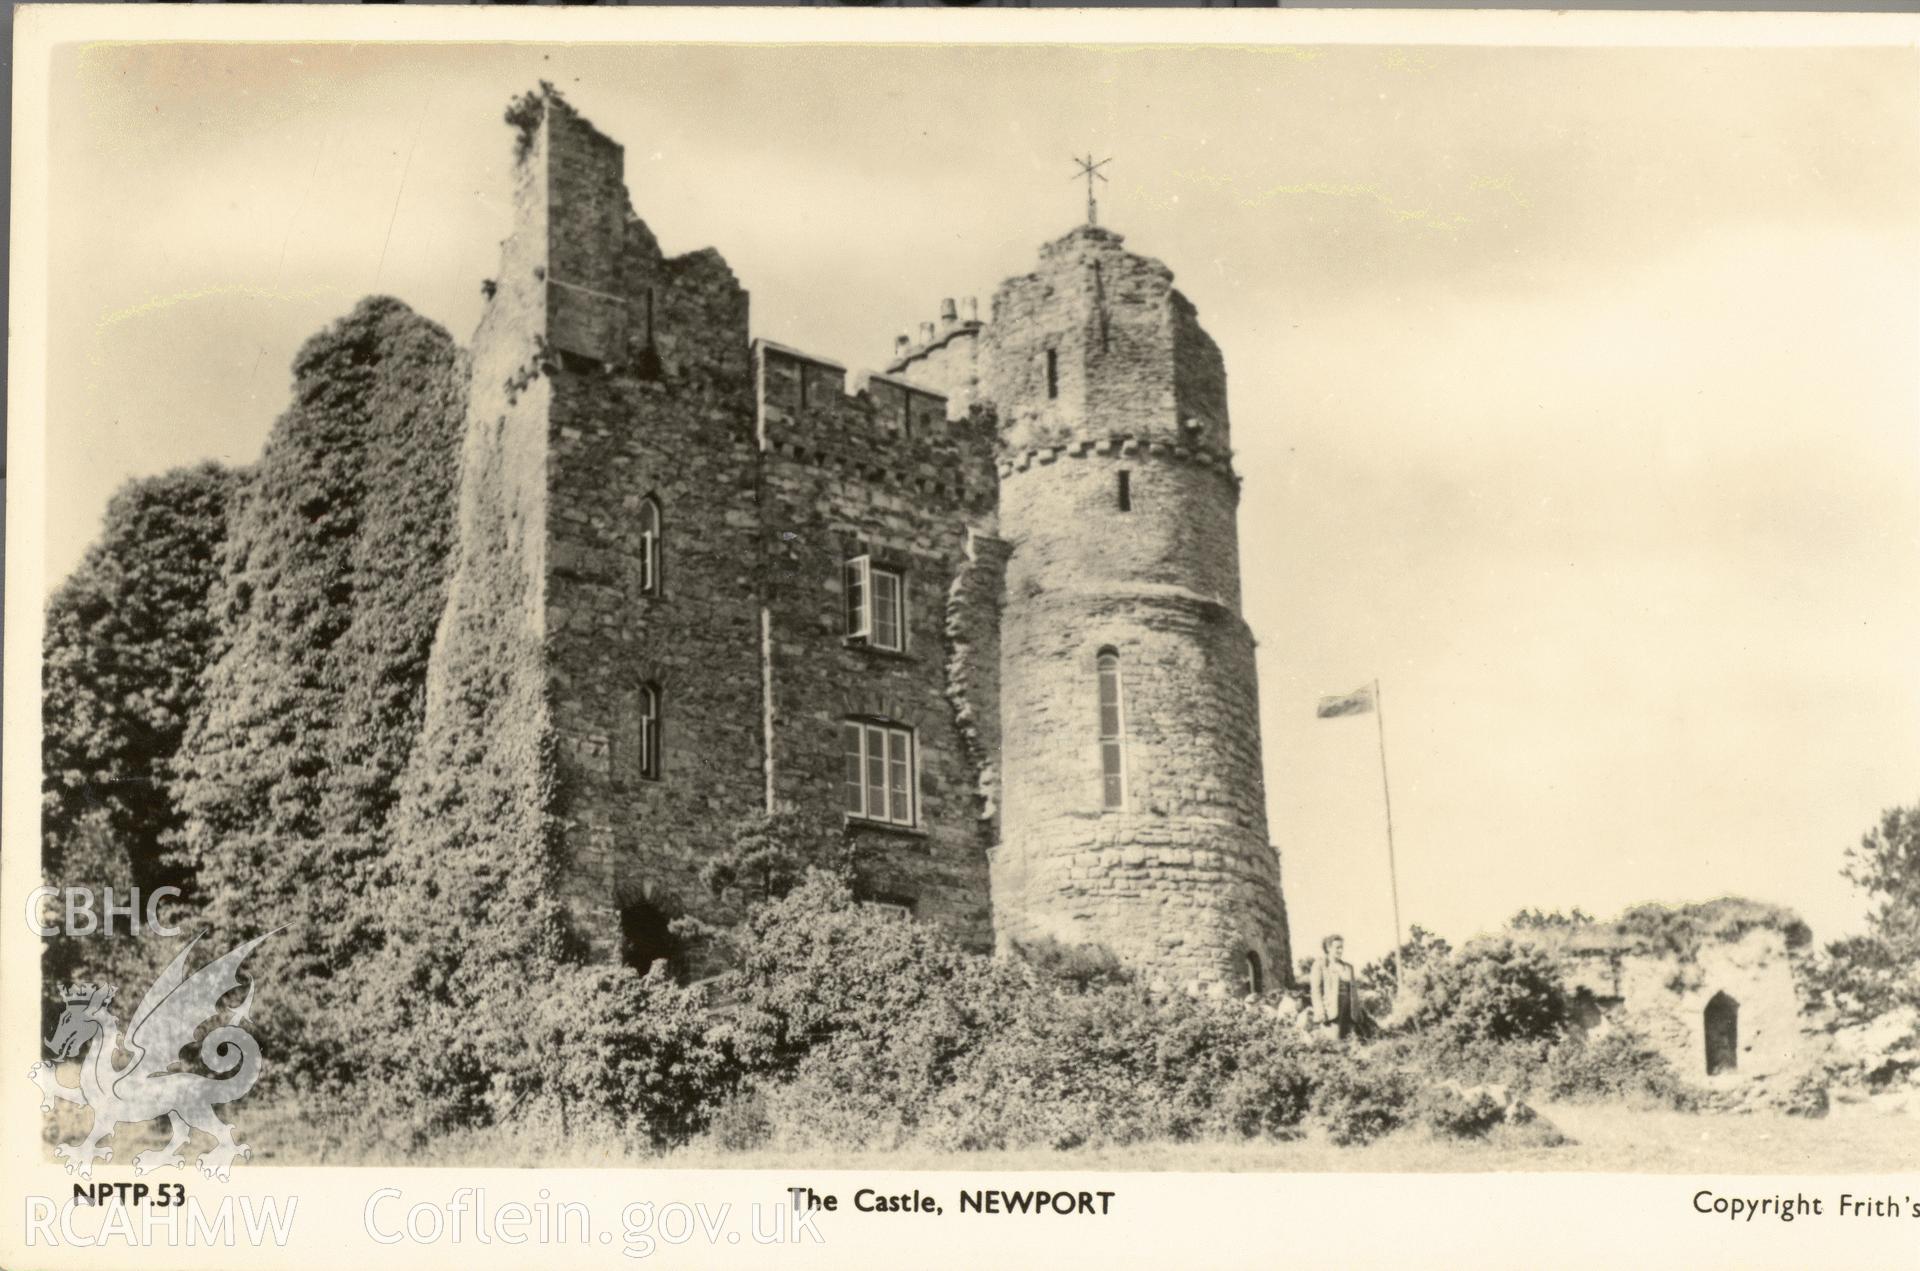 Digitised postcard image of The Castle, Newport, Pemrokeshire, Frith's Series. Produced by Parks and Gardens Data Services, from an original item in the Peter Davis Collection at Parks and Gardens UK. We hold only web-resolution images of this collection, suitable for viewing on screen and for research purposes only. We do not hold the original images, or publication quality scans.